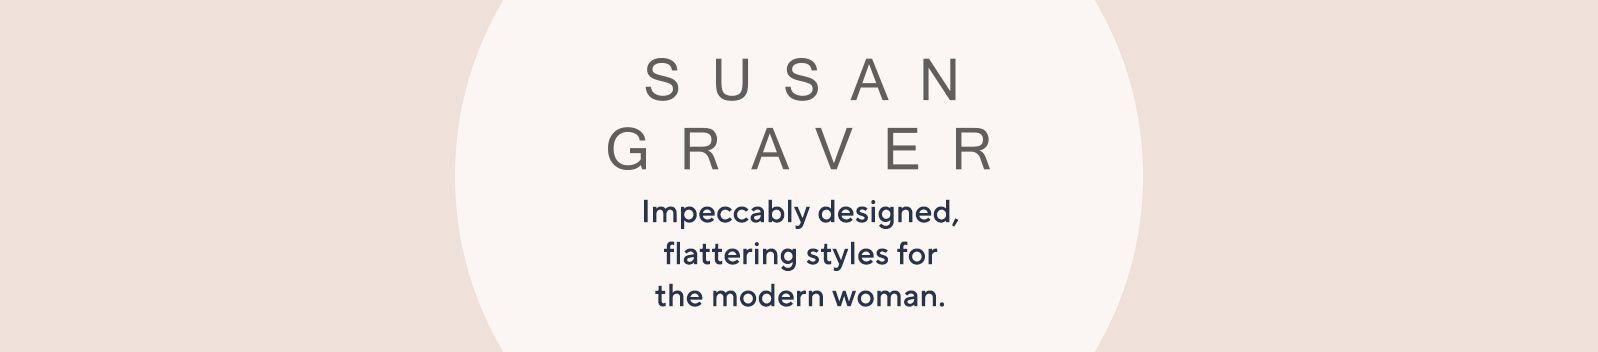 Susan Graver. Impeccably designed, flattering styles for the modern woman.